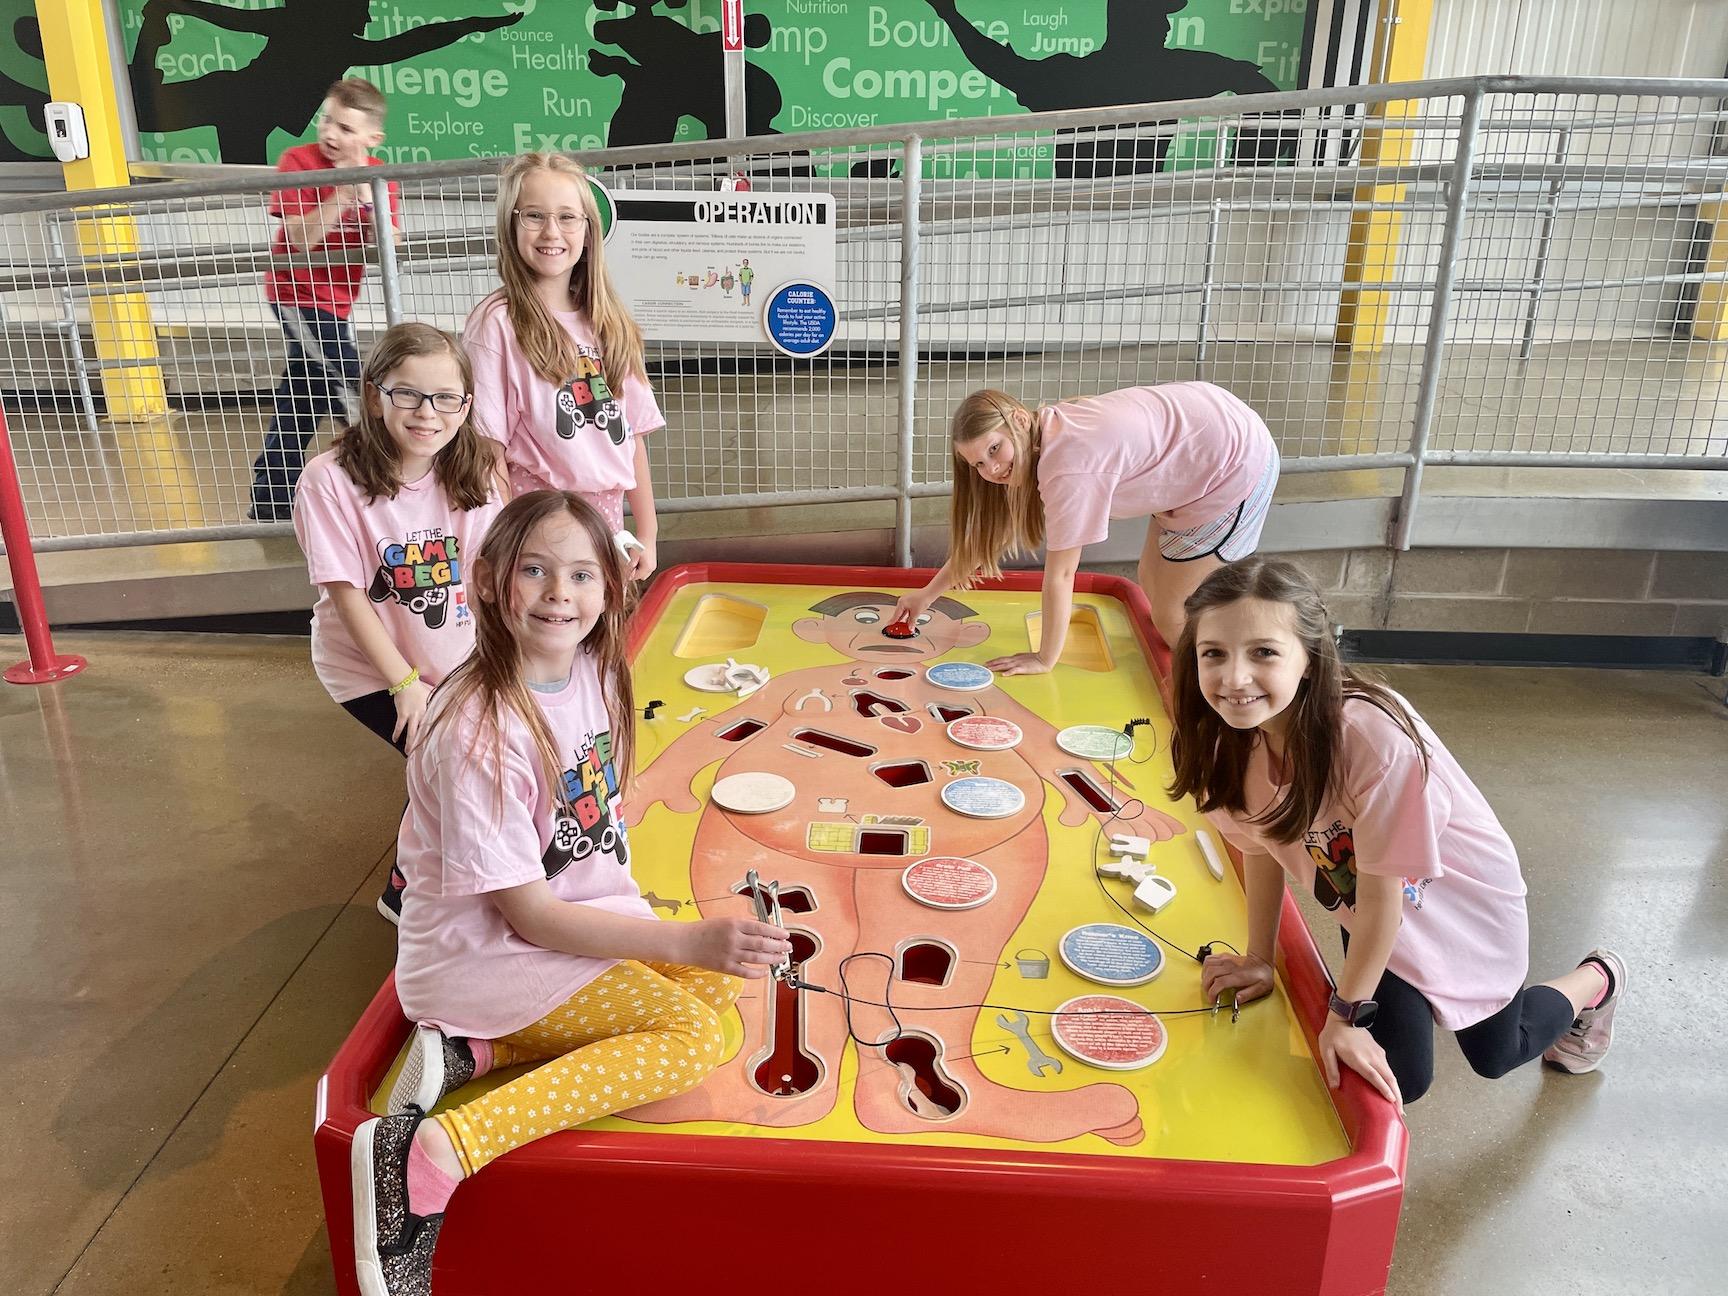 Harrison Park students Lunabelle Coates, Sierra Mason, Helena Sever, Addison Comer and Lucy Massarelli enjoy a giant game of Operation!